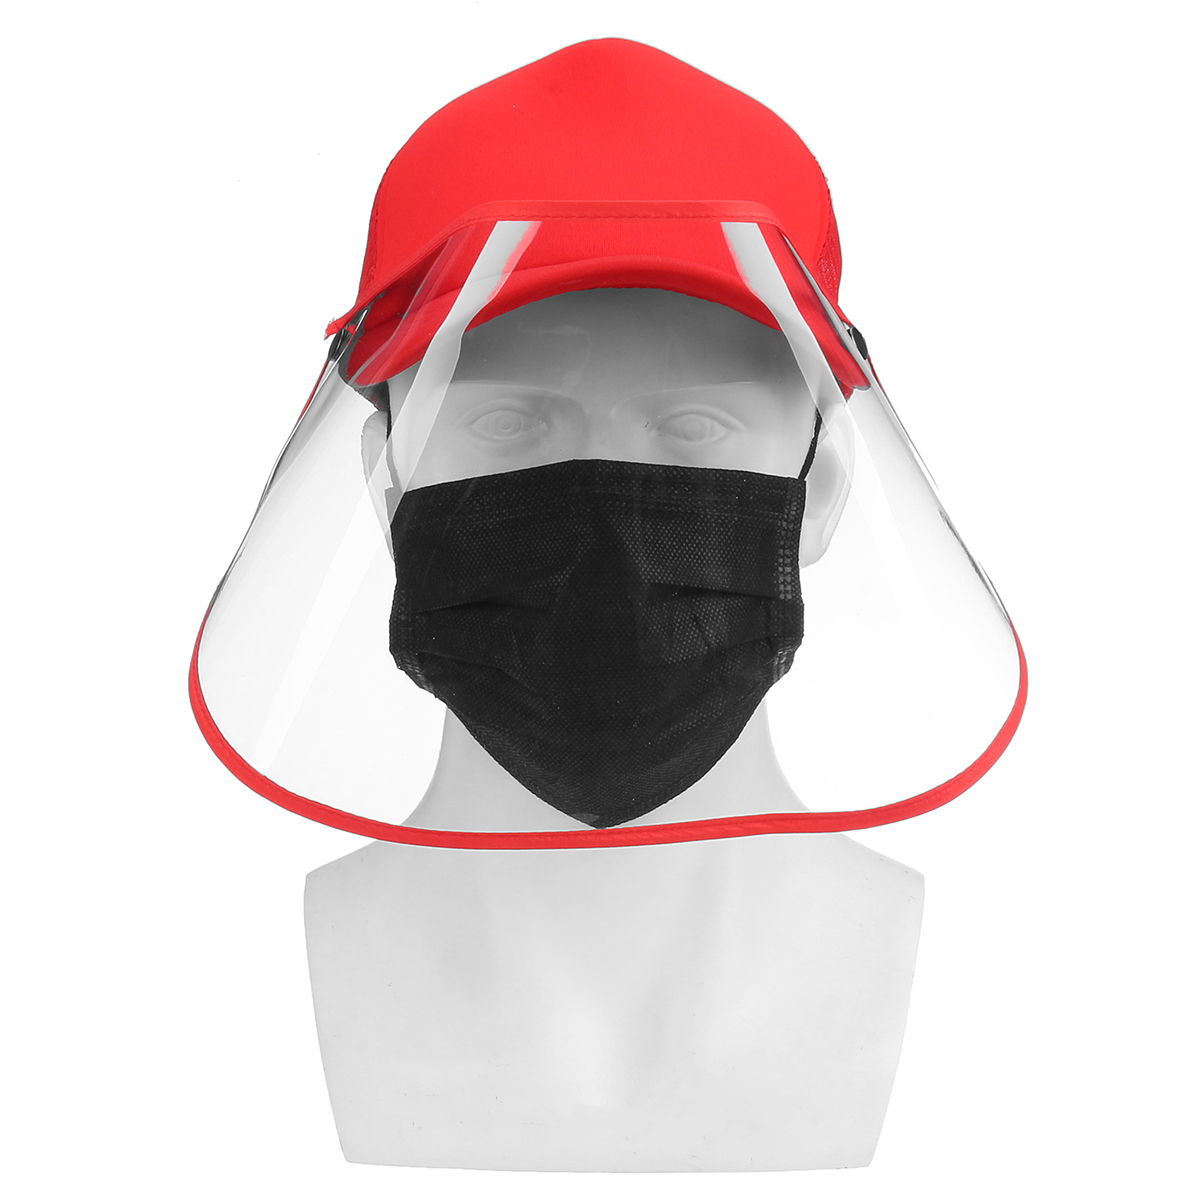 Protective-Cap-Hat-Cover-Safe-Prevent-Droplet-Splash-Proof-Outdoor-Anti-spitting-1660356-4